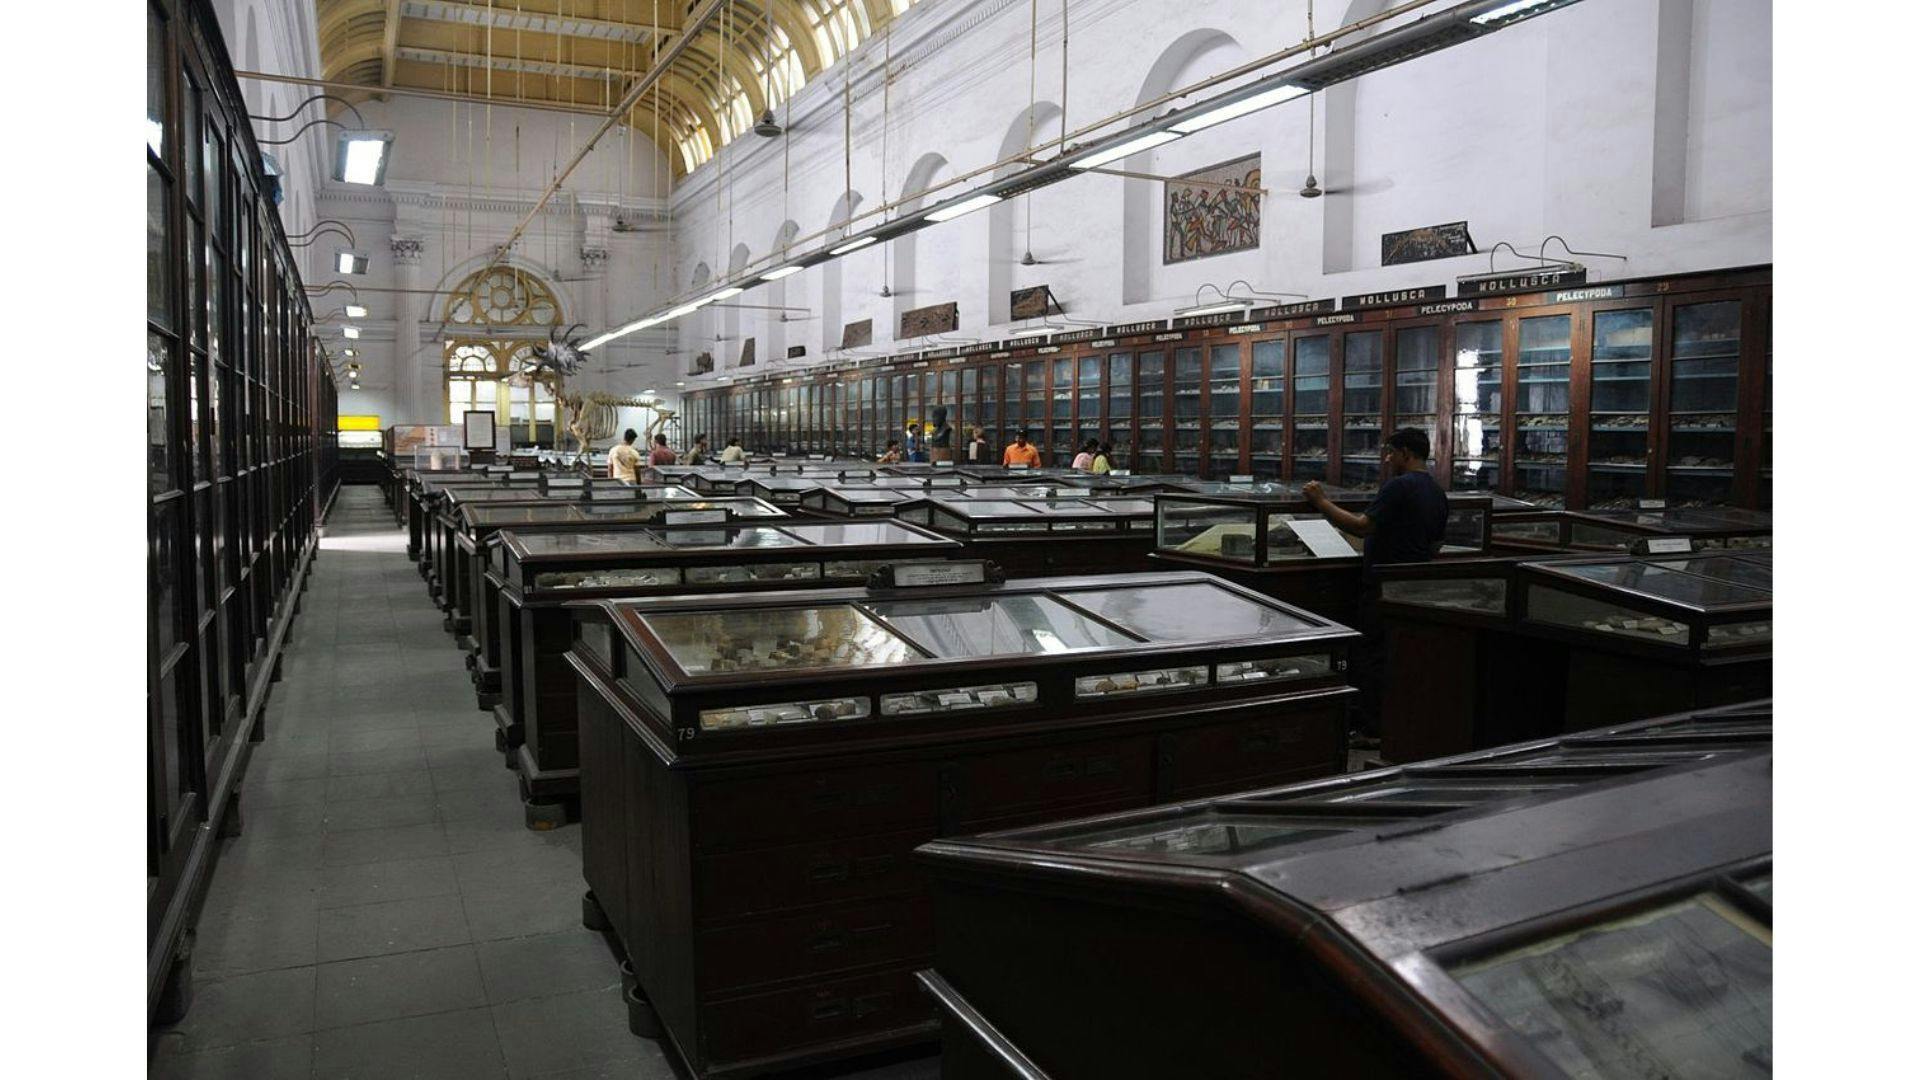 Showcases with different types of fossils, Indian Museum, Kolkata | Wikimedia Commons